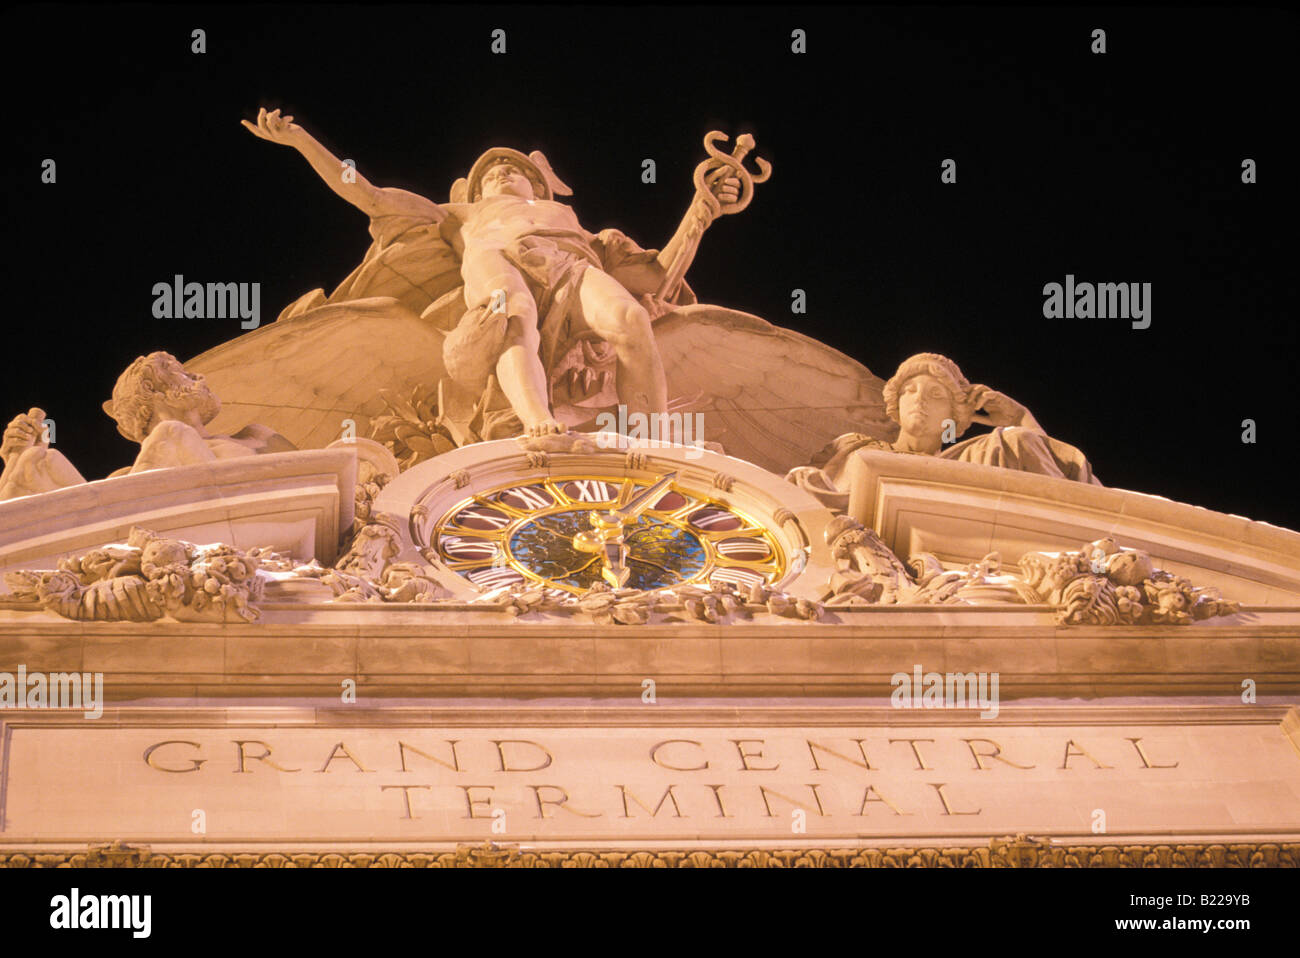 Grand central clock NYC Stock Photo